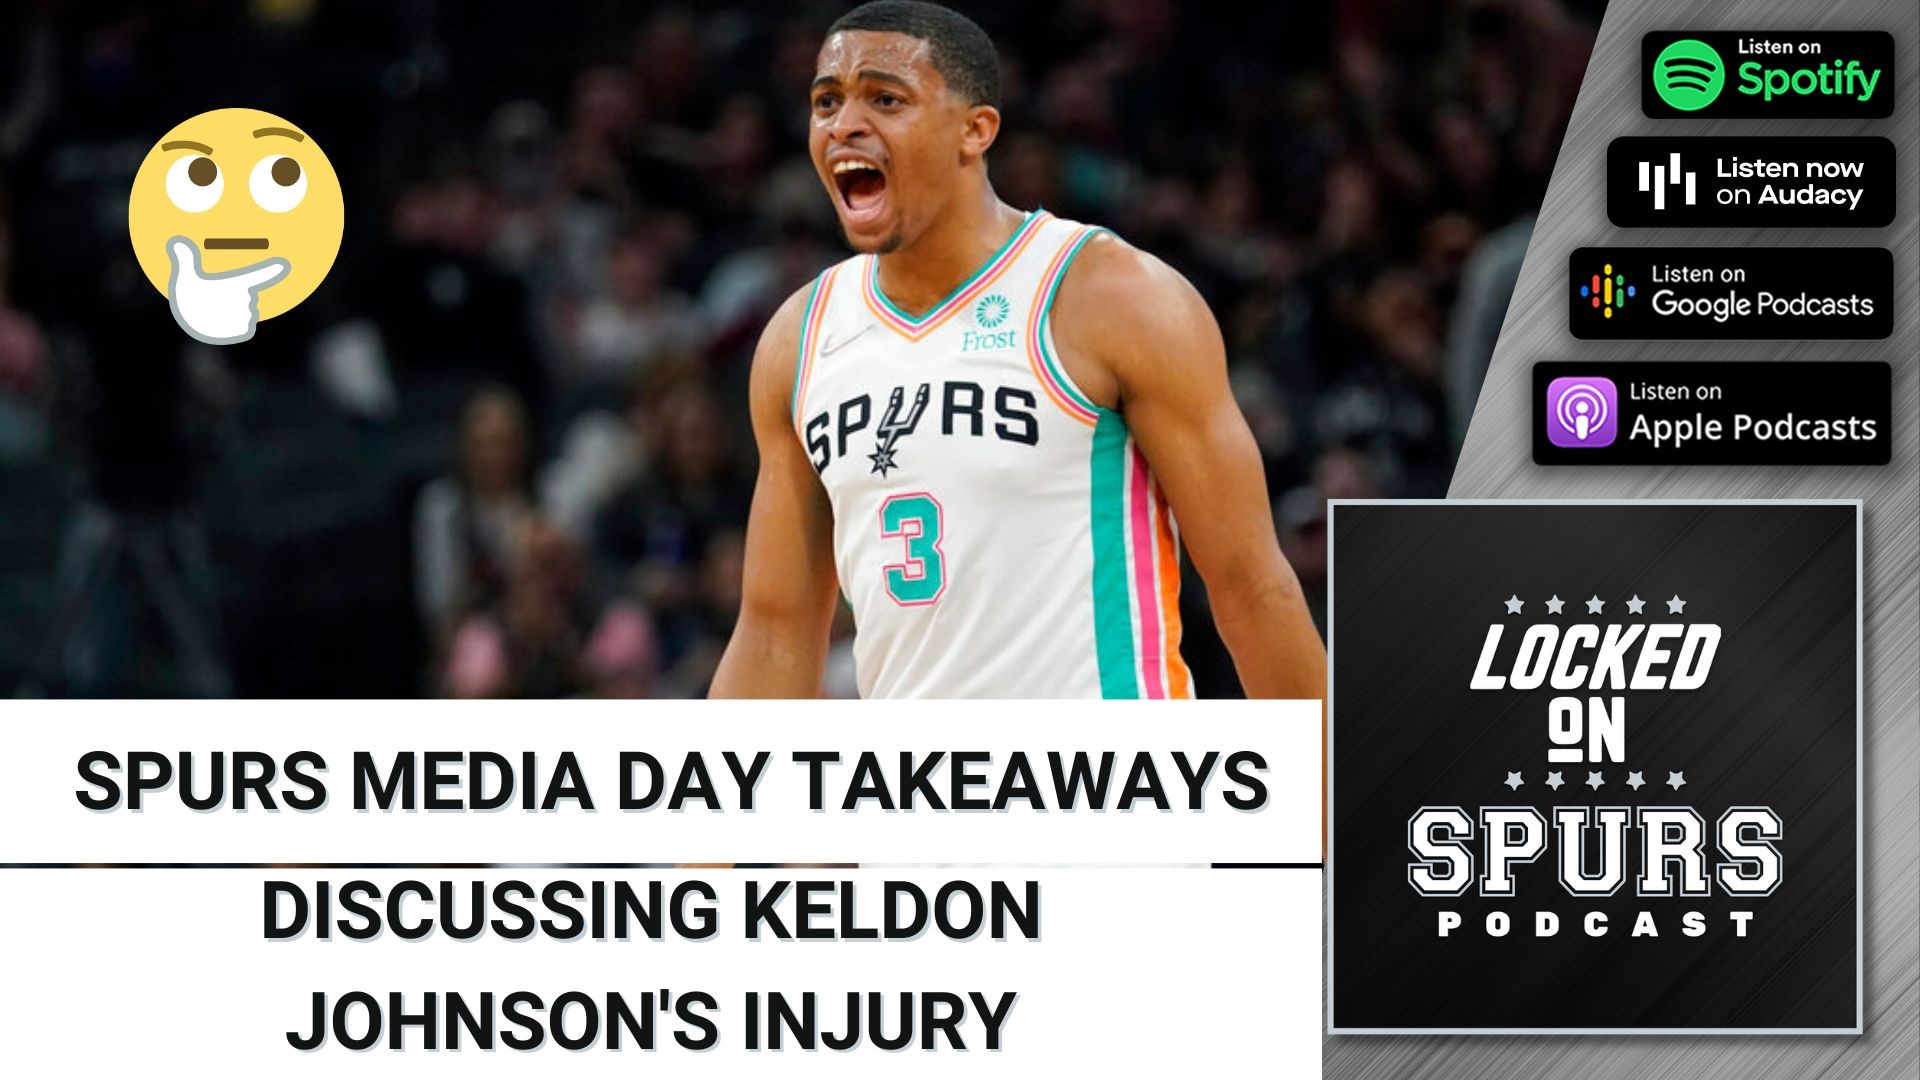 Spurs' Media Day 2022 is a wrap and we take a deep look at Keldon's shoulder injury.